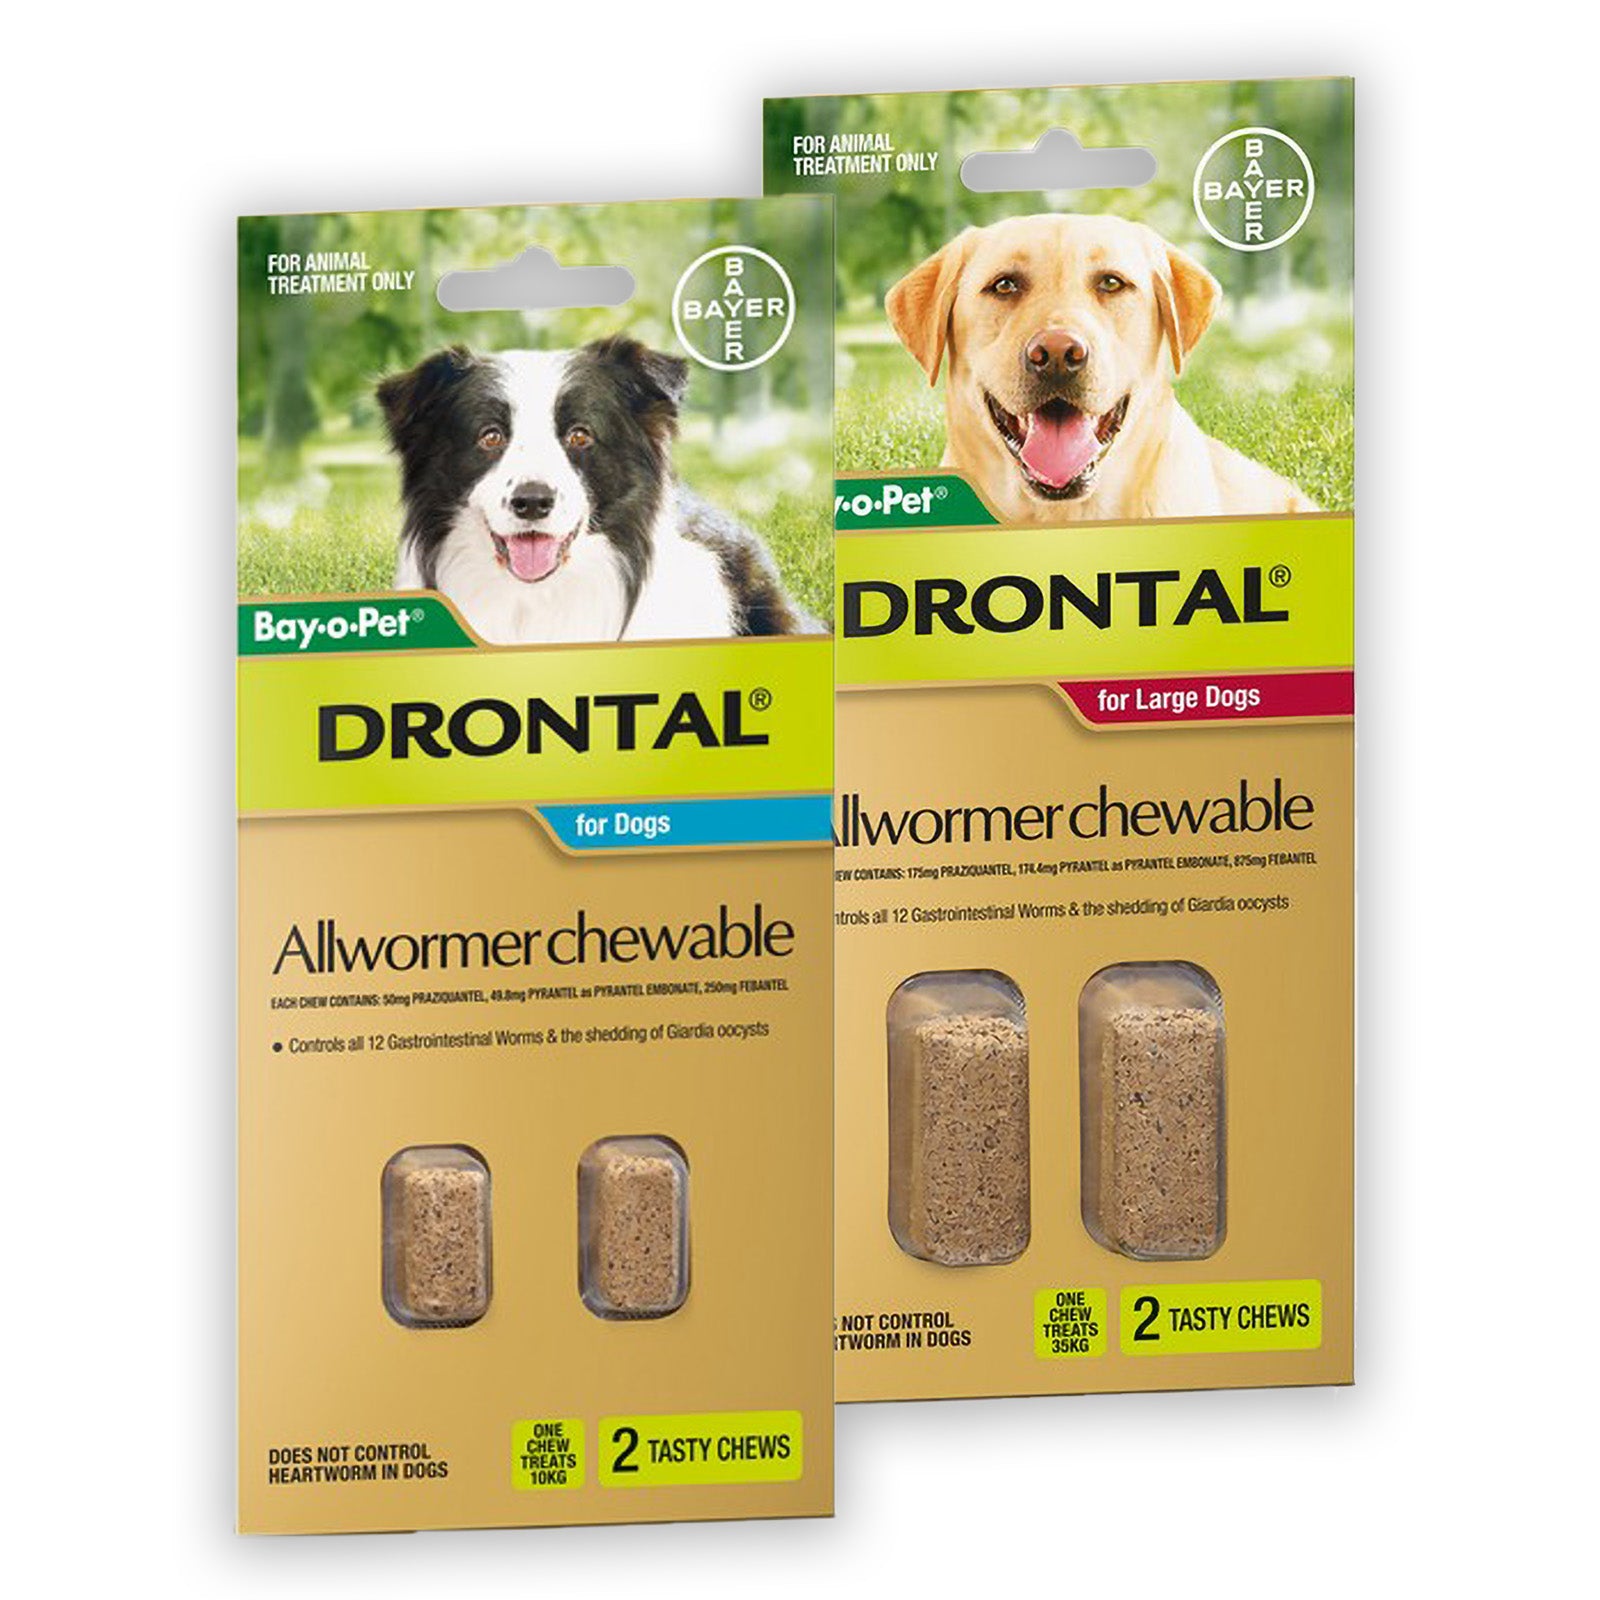 Drontal Chewable Worming Tablets for Dogs